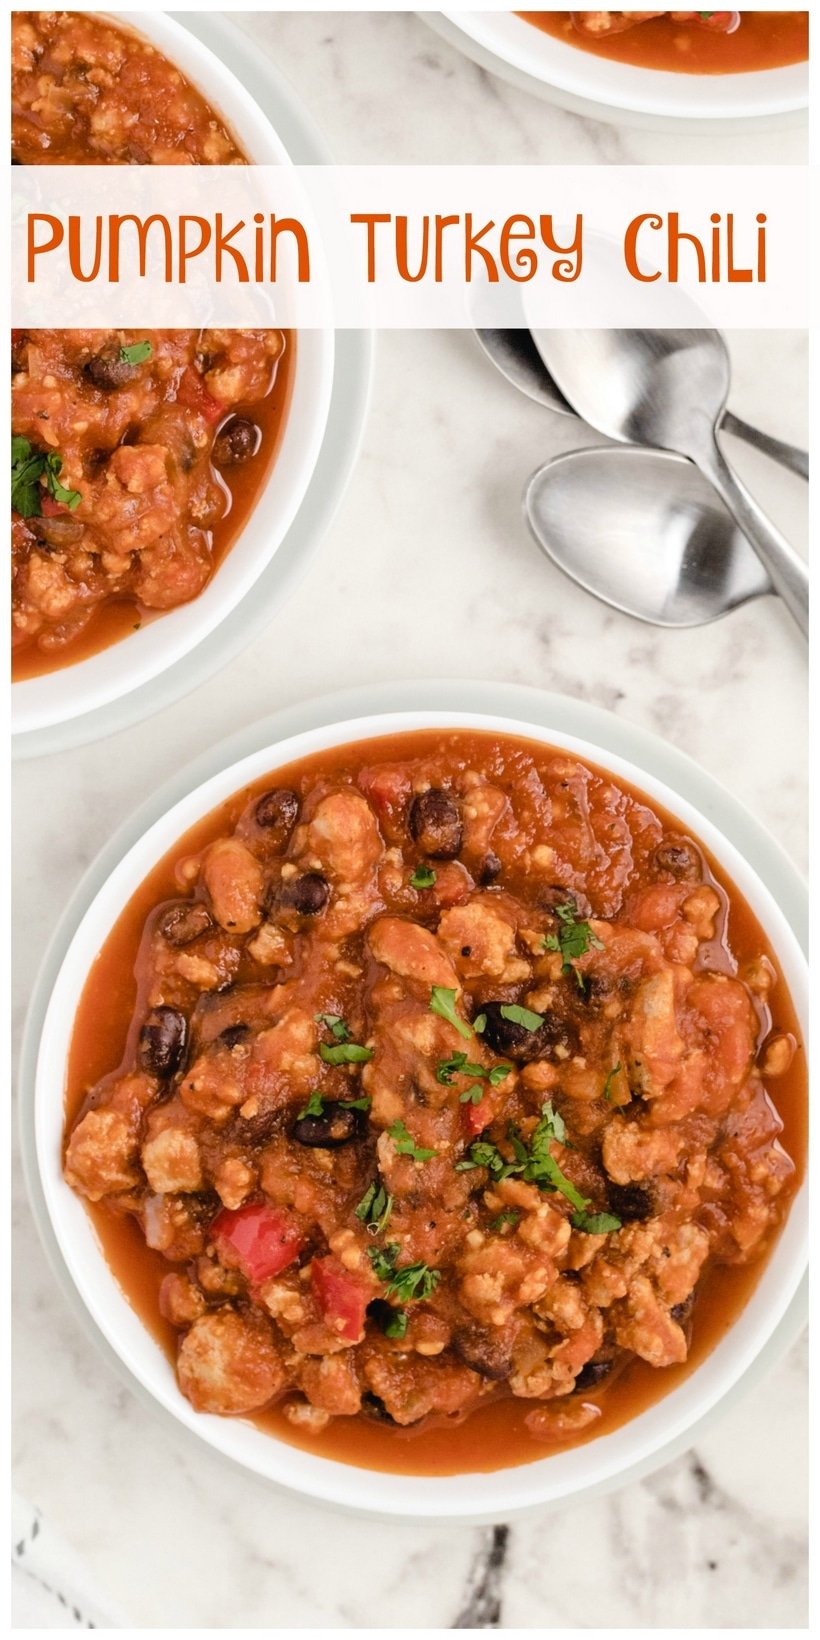 Pumpkin Chili is extra delicious because pumpkin combined with savory spices is a flavor match made in heaven. The sweetness of the pumpkin provides the perfect balance of tasty flavor to this hearty chili recipe.  via @cmpollak1